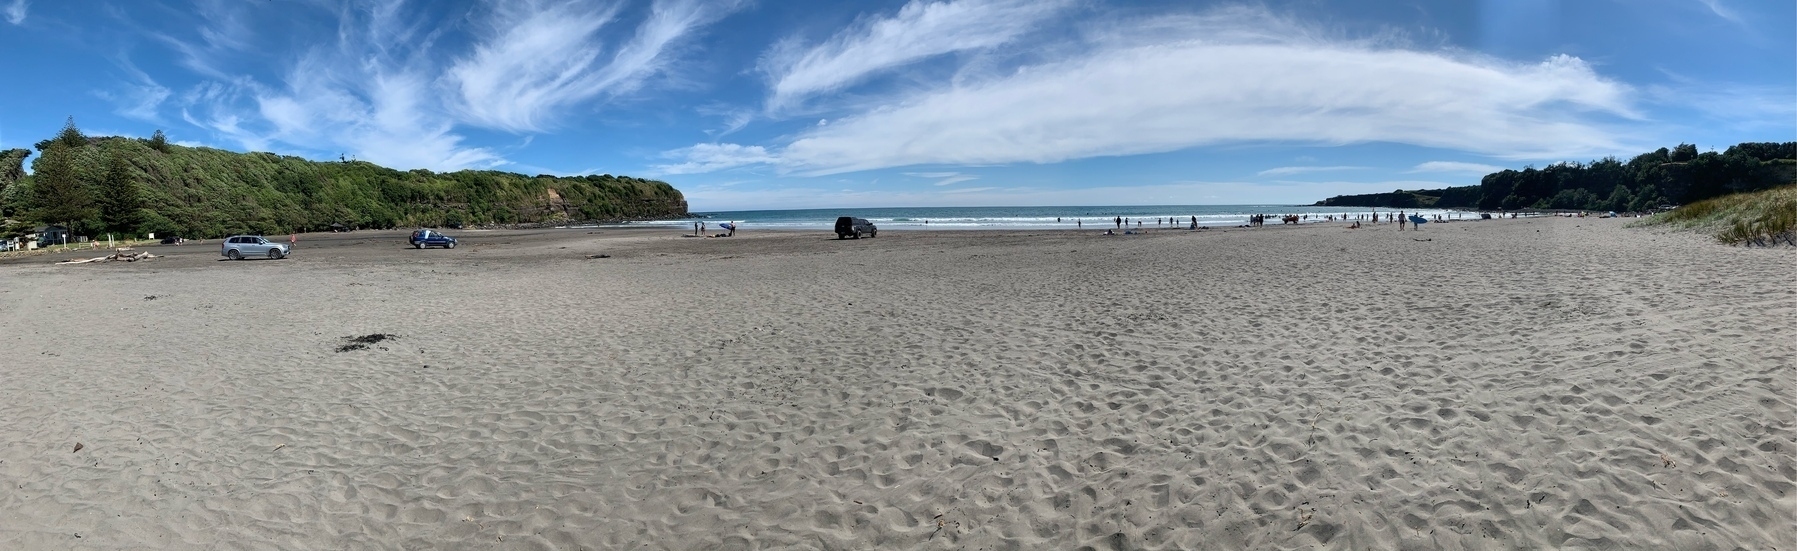 Ōpunake beach from the beach itself, looking out to the ocean water of the South Taranaki Bight